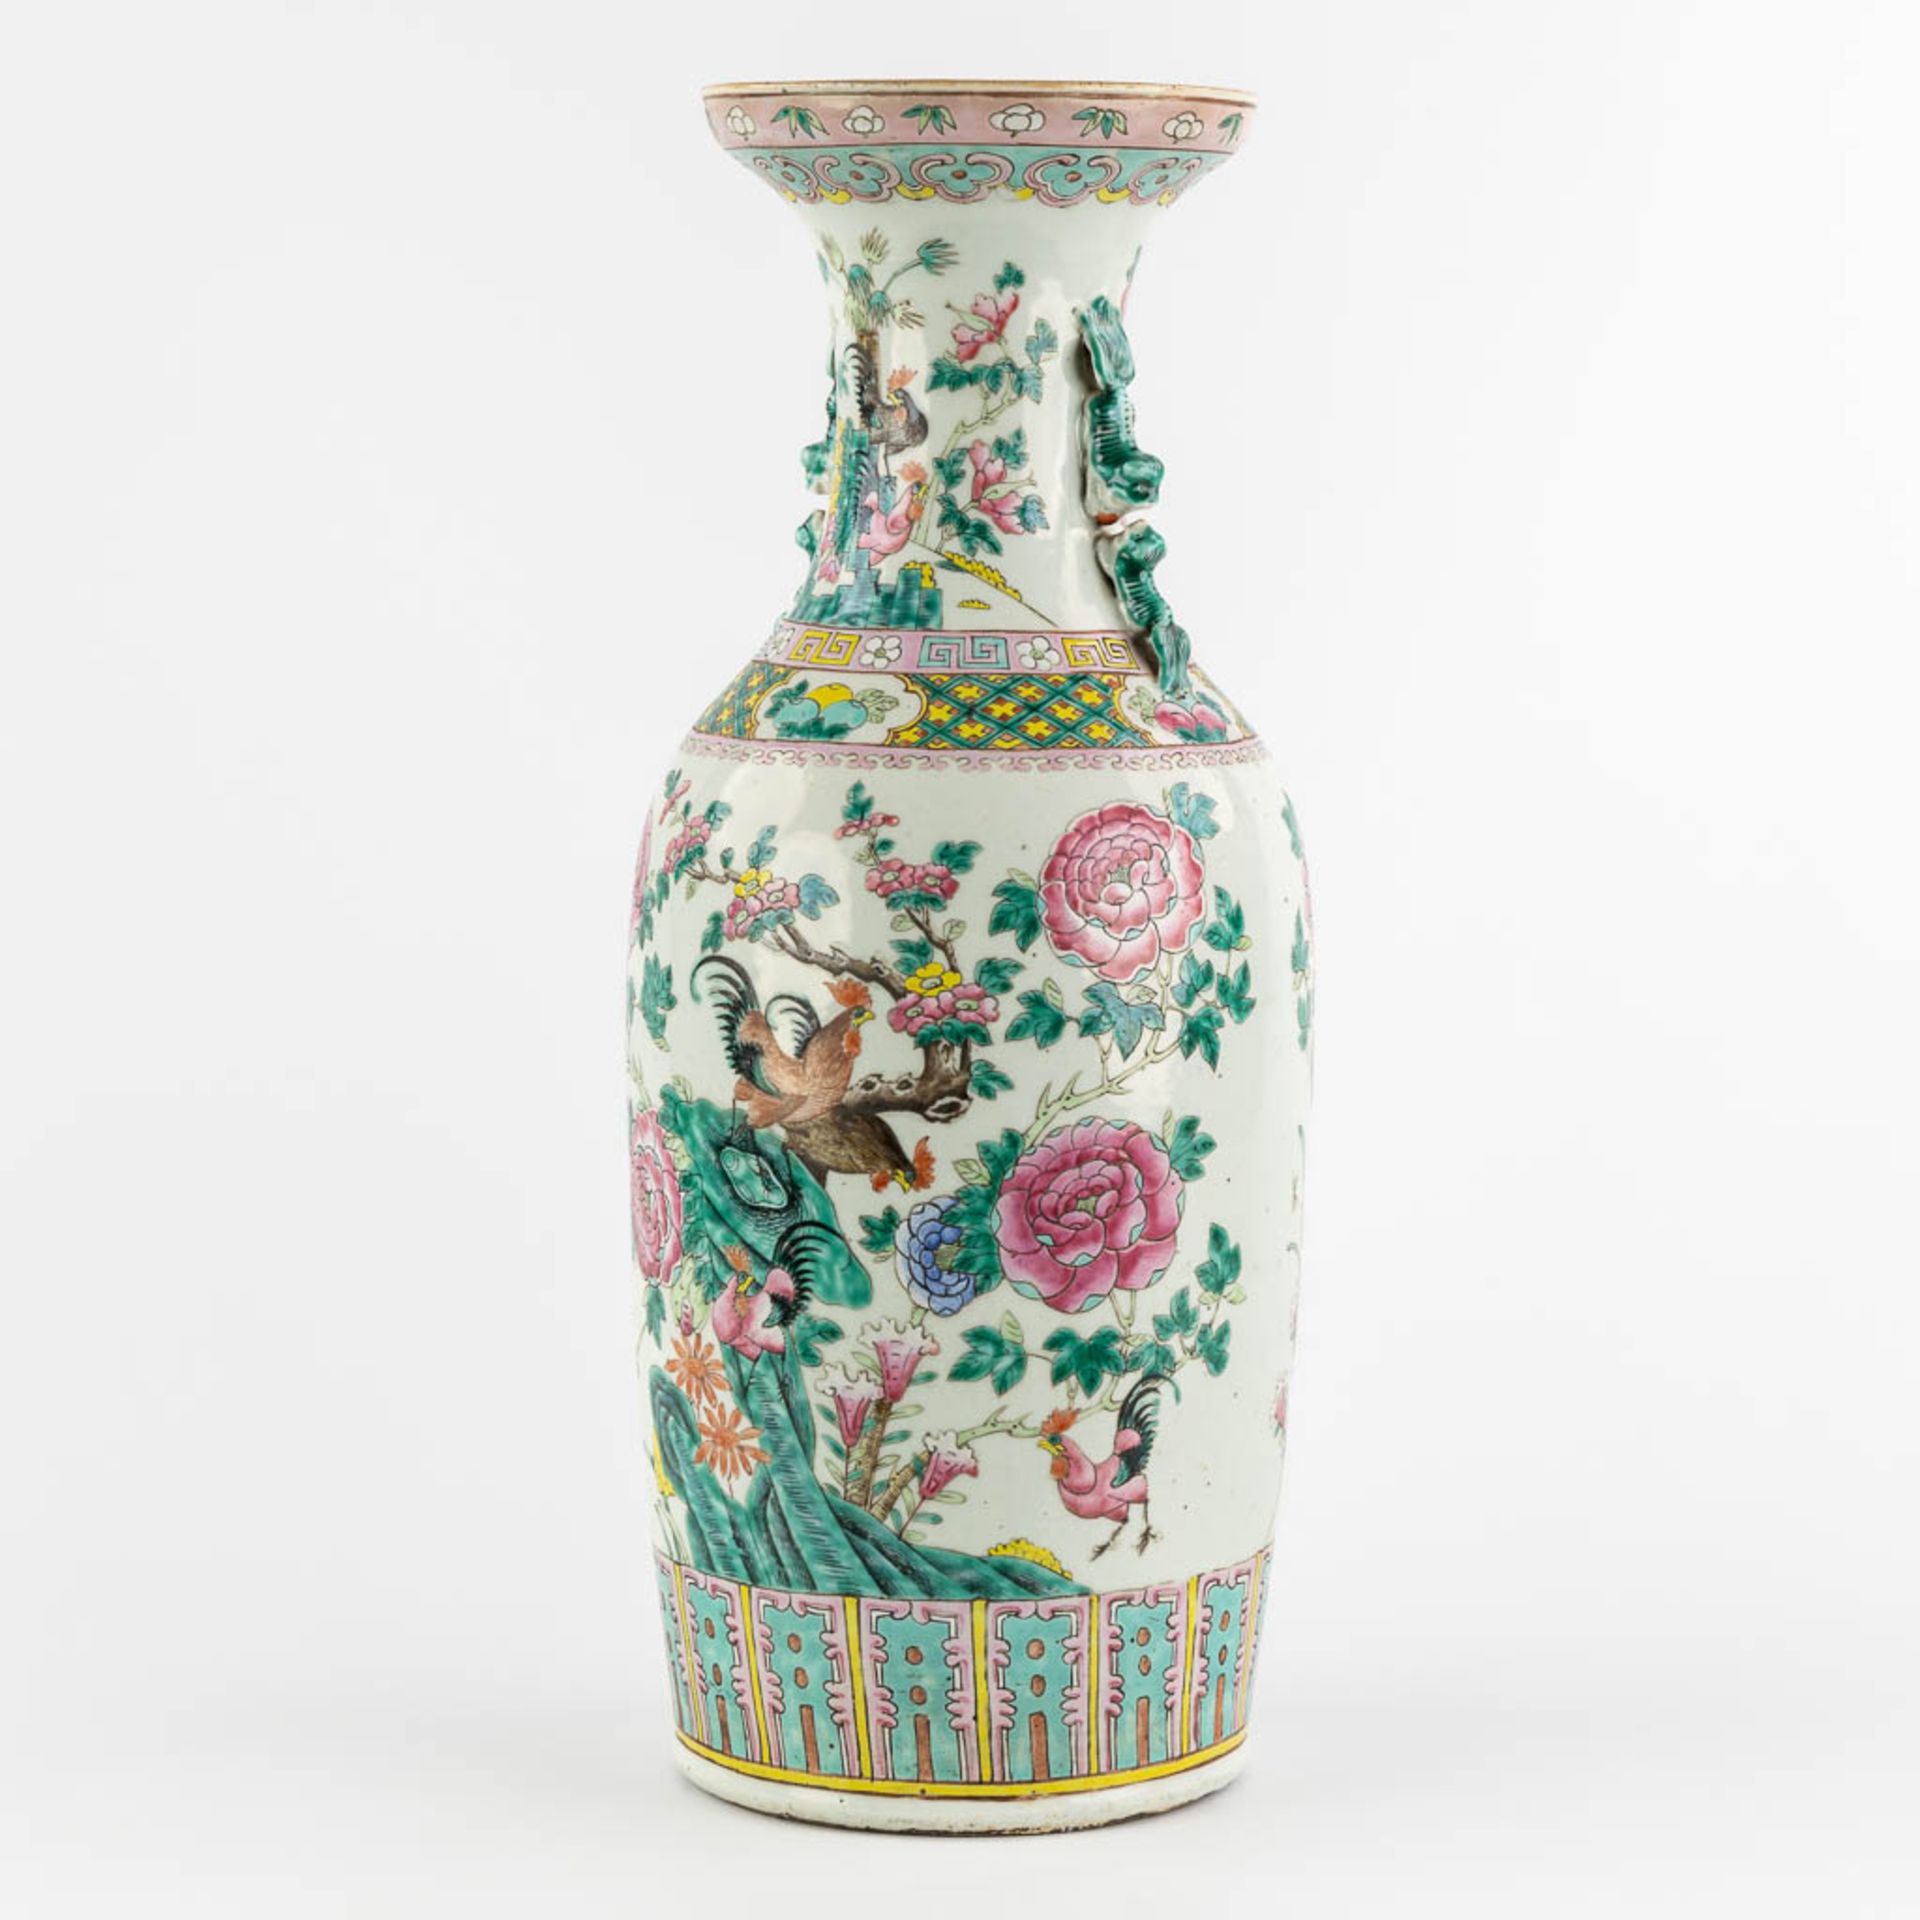 A large Chinese Famille Rose vase decorated with Chicken and Flora. (H:59 x D:23 cm) - Image 3 of 11